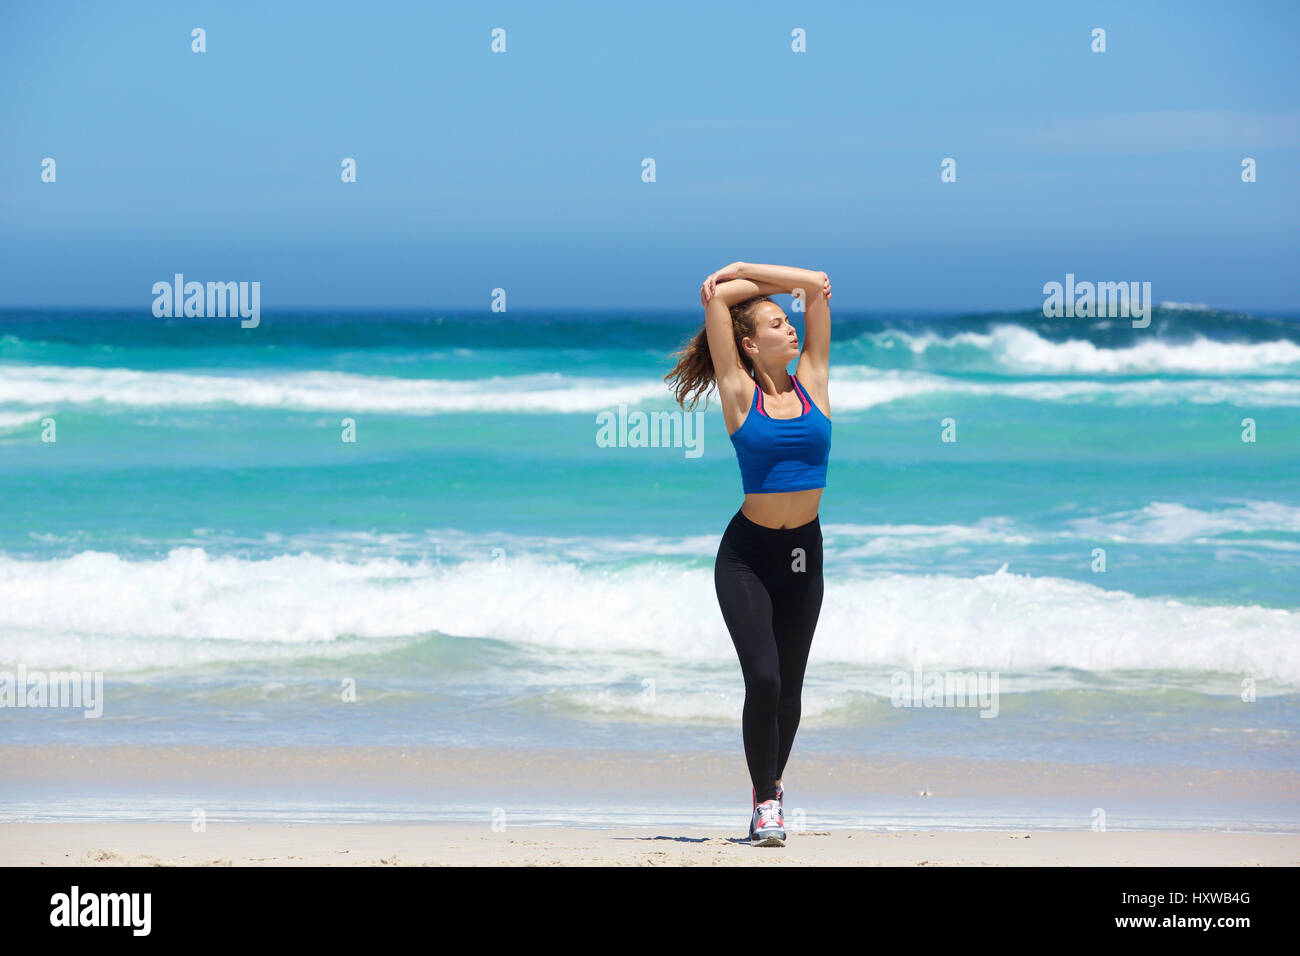 Longueur complète young woman walking on beach with arms raised Banque D'Images